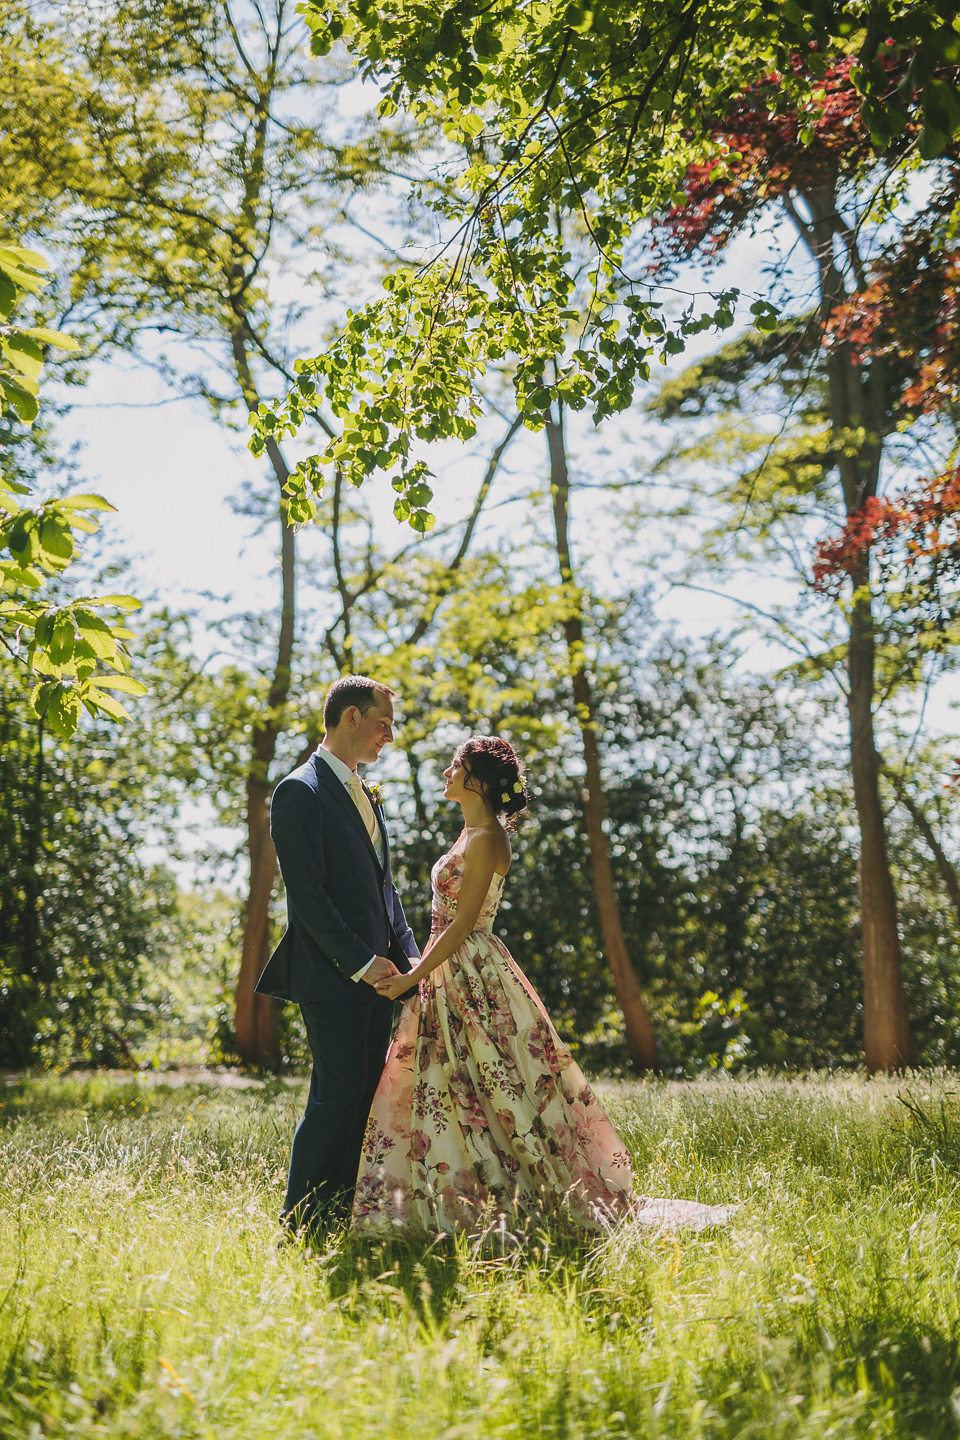 A Wendy Makin Floral Gown for a Rustic and Vintage Inspired Wedding. Photography by The Campbells.